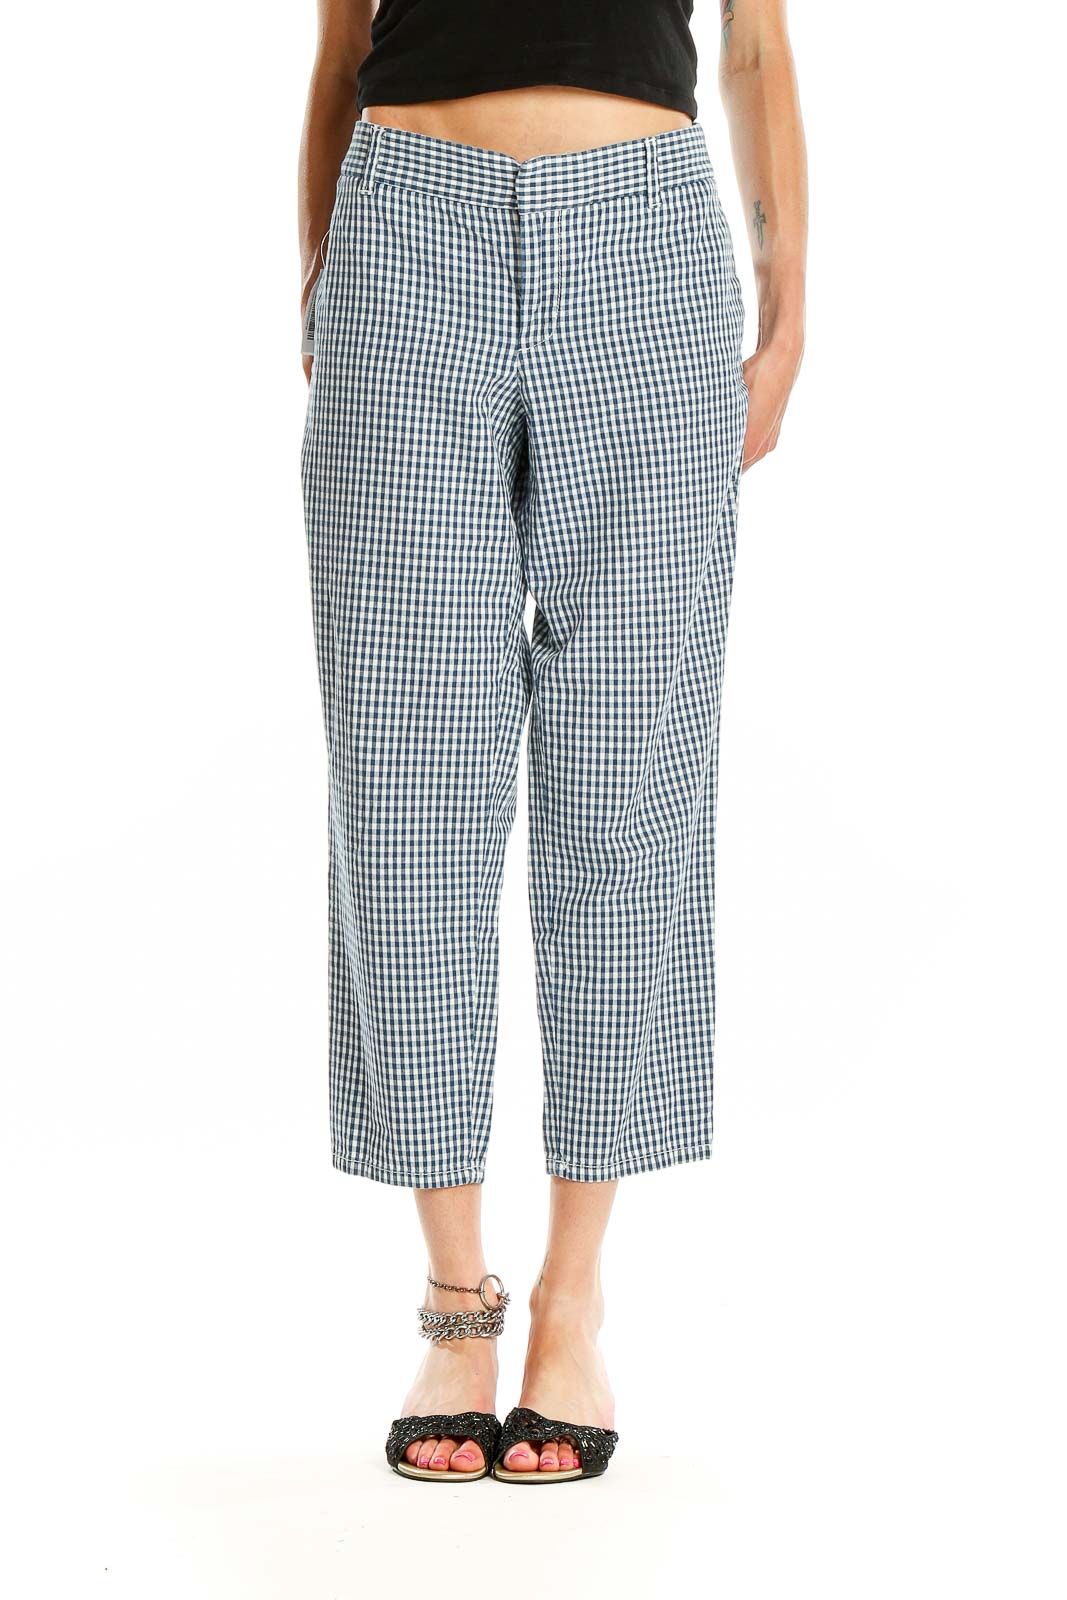 Blue Gingham Casual Pants Front